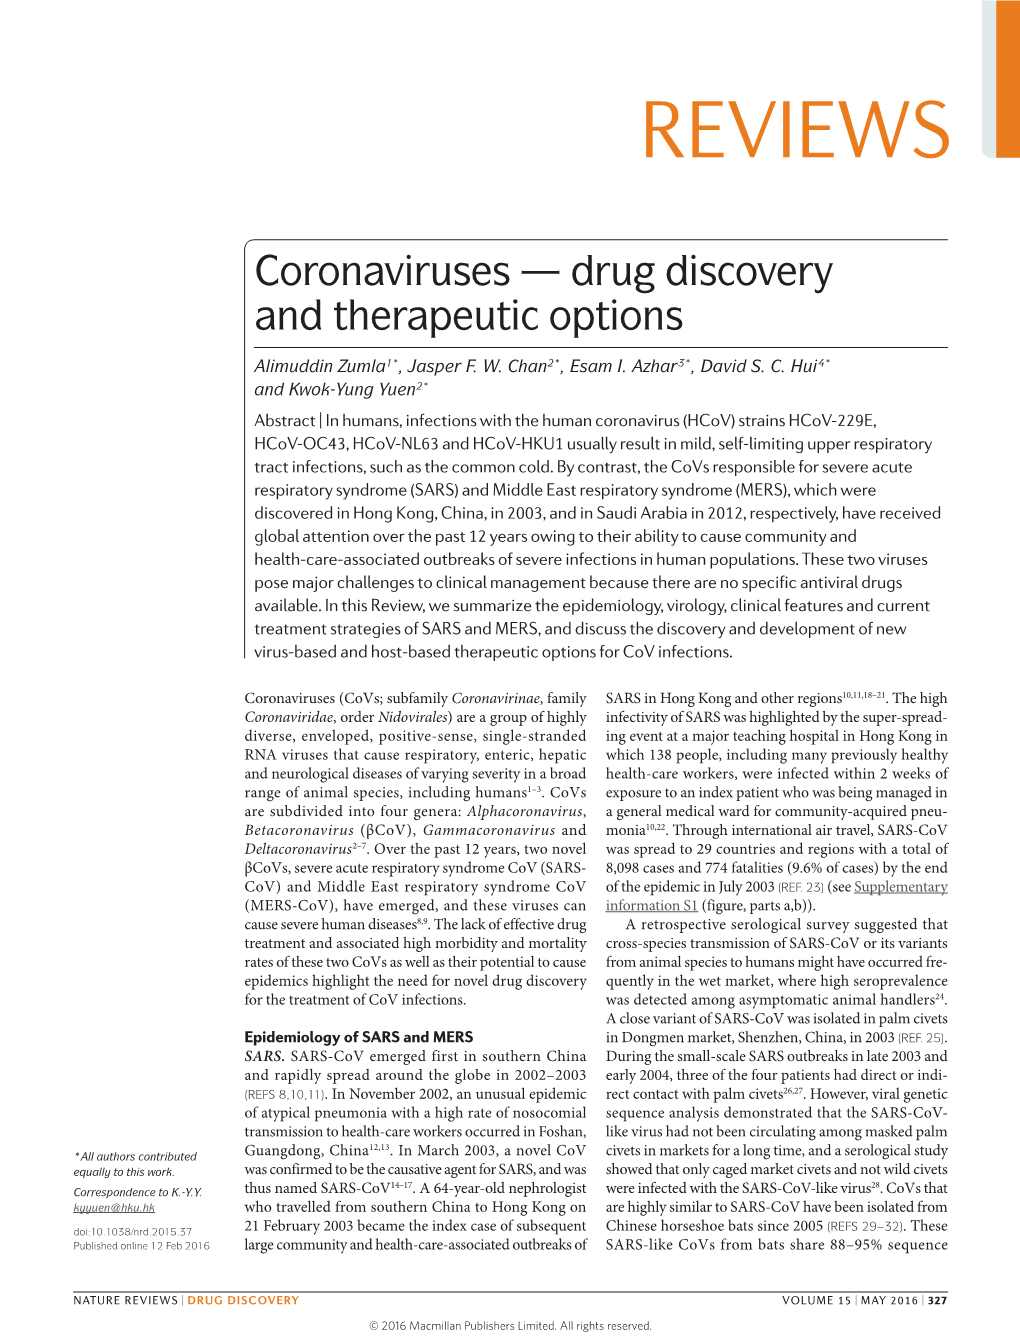 Coronaviruses — Drug Discovery and Therapeutic Options